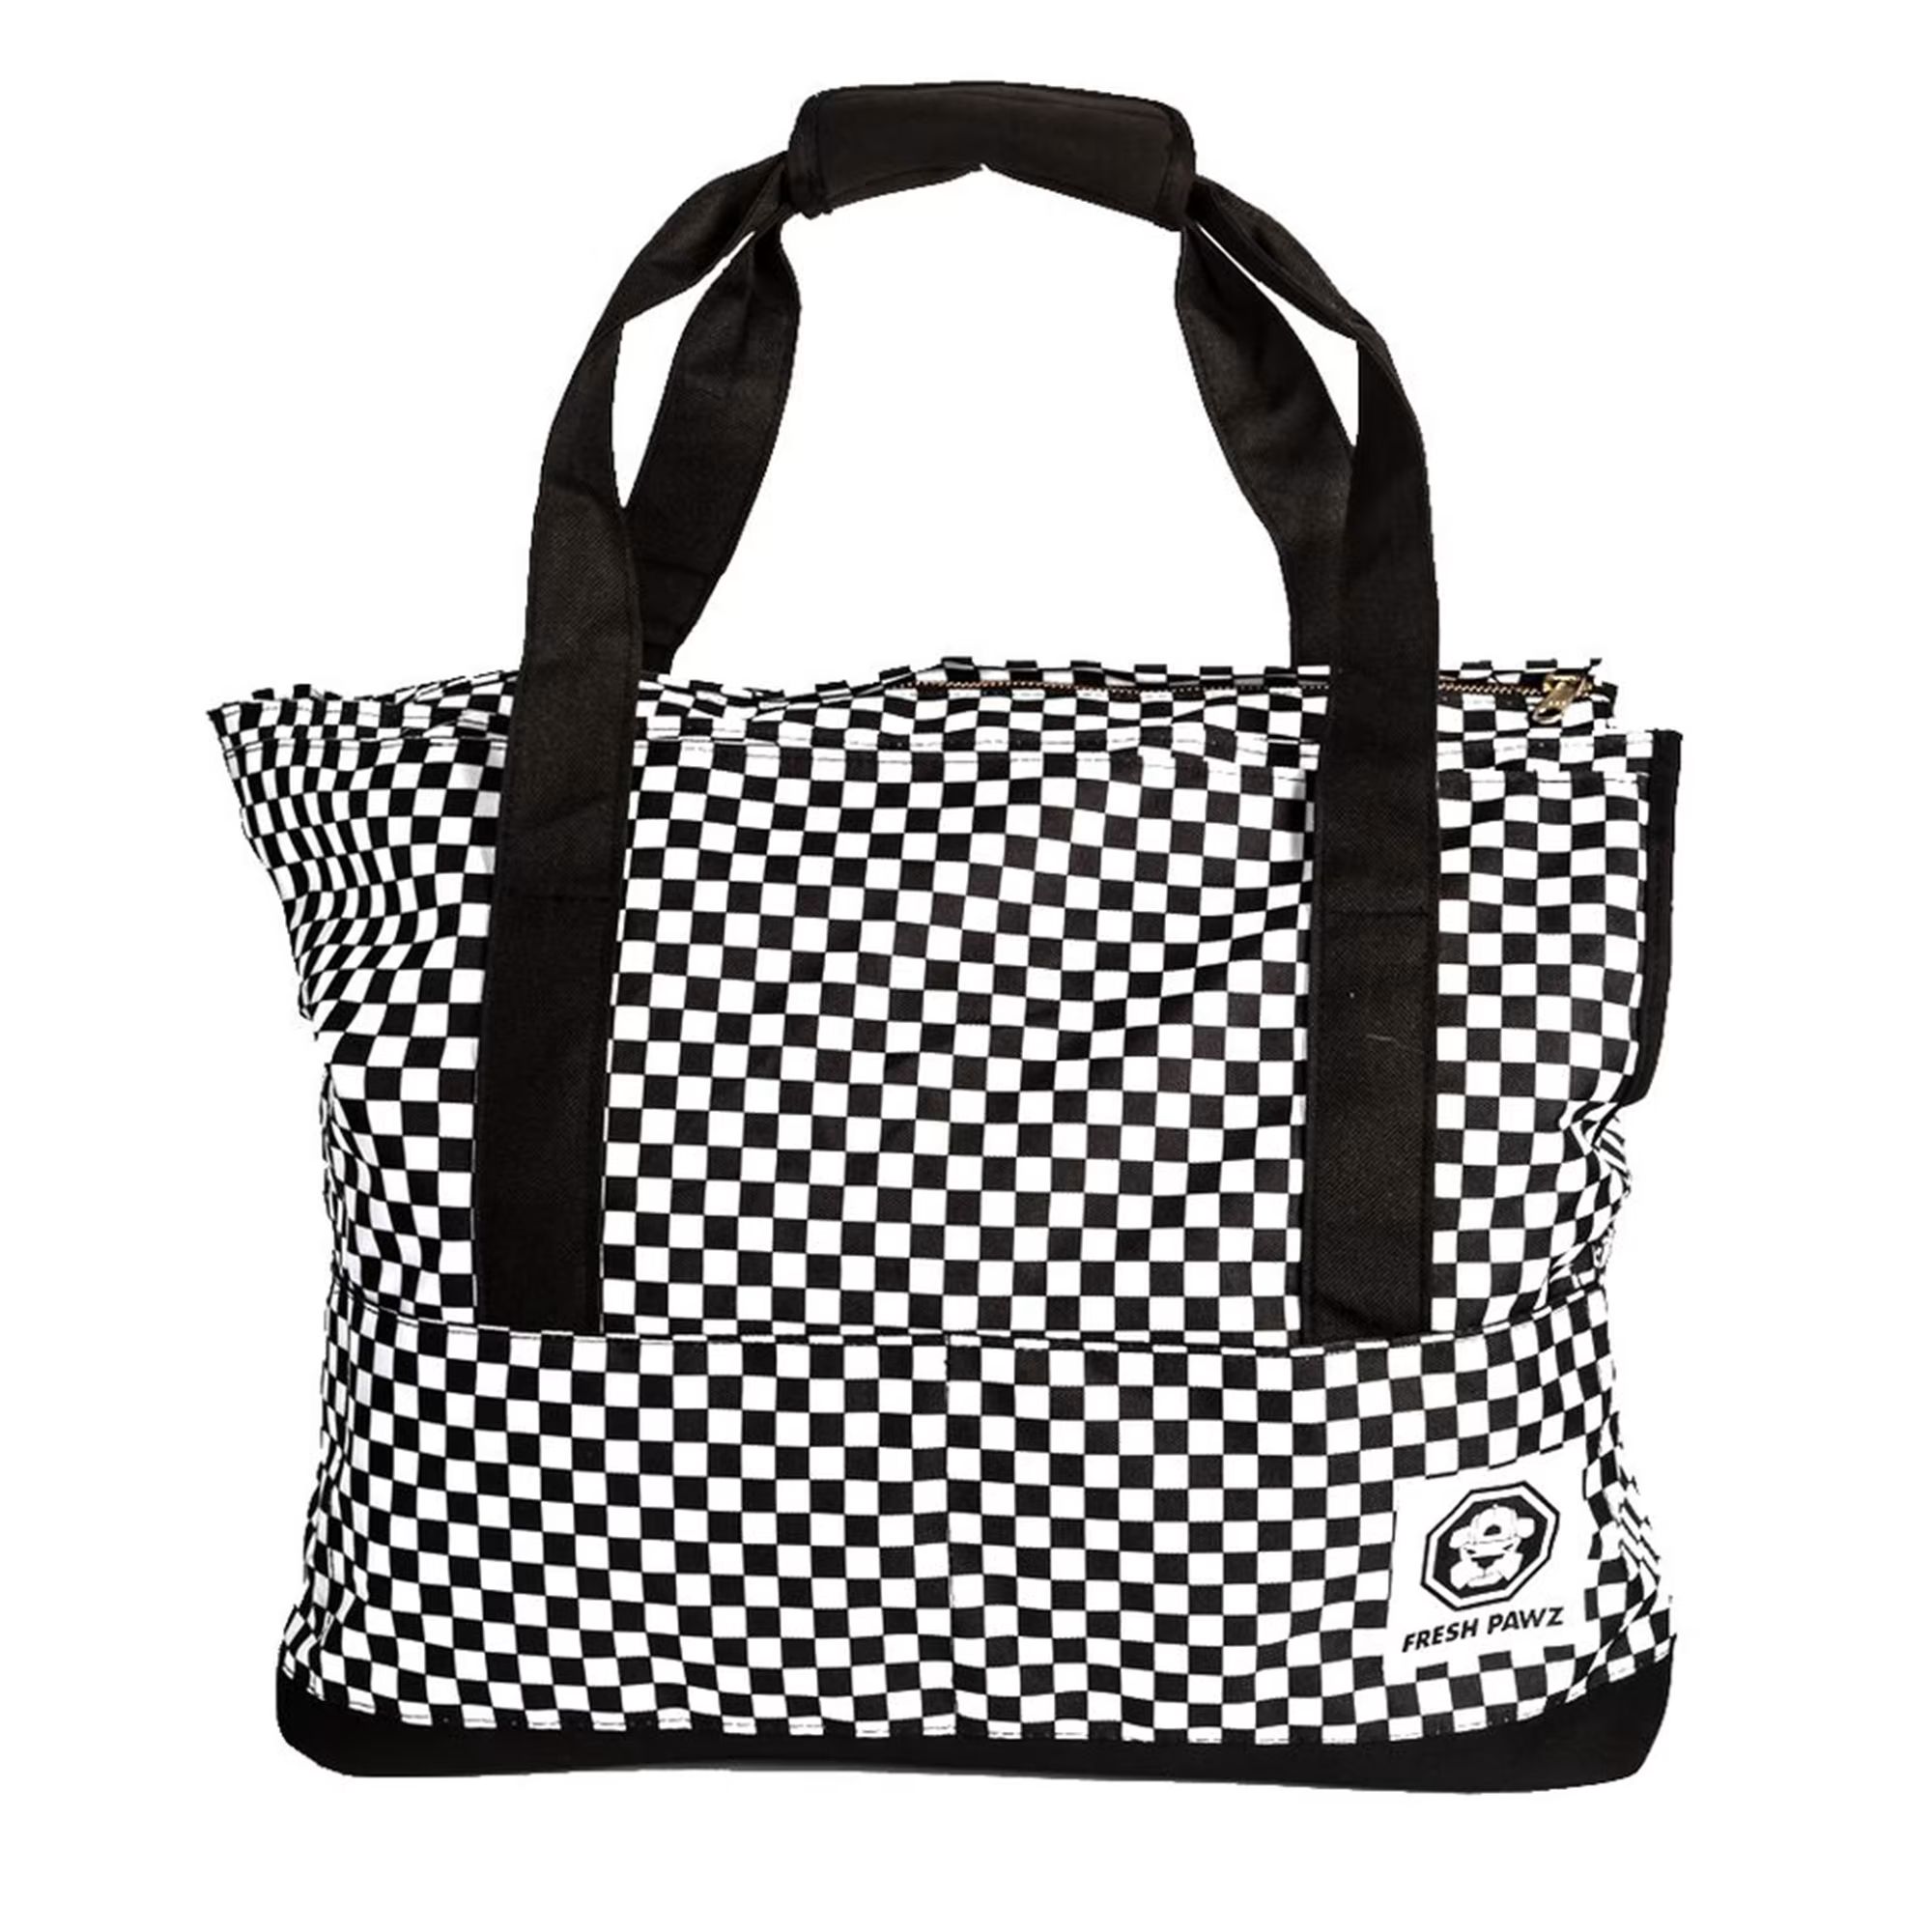 Fresh Pawz The Checkerboard Dog Carrier Bag | Petco